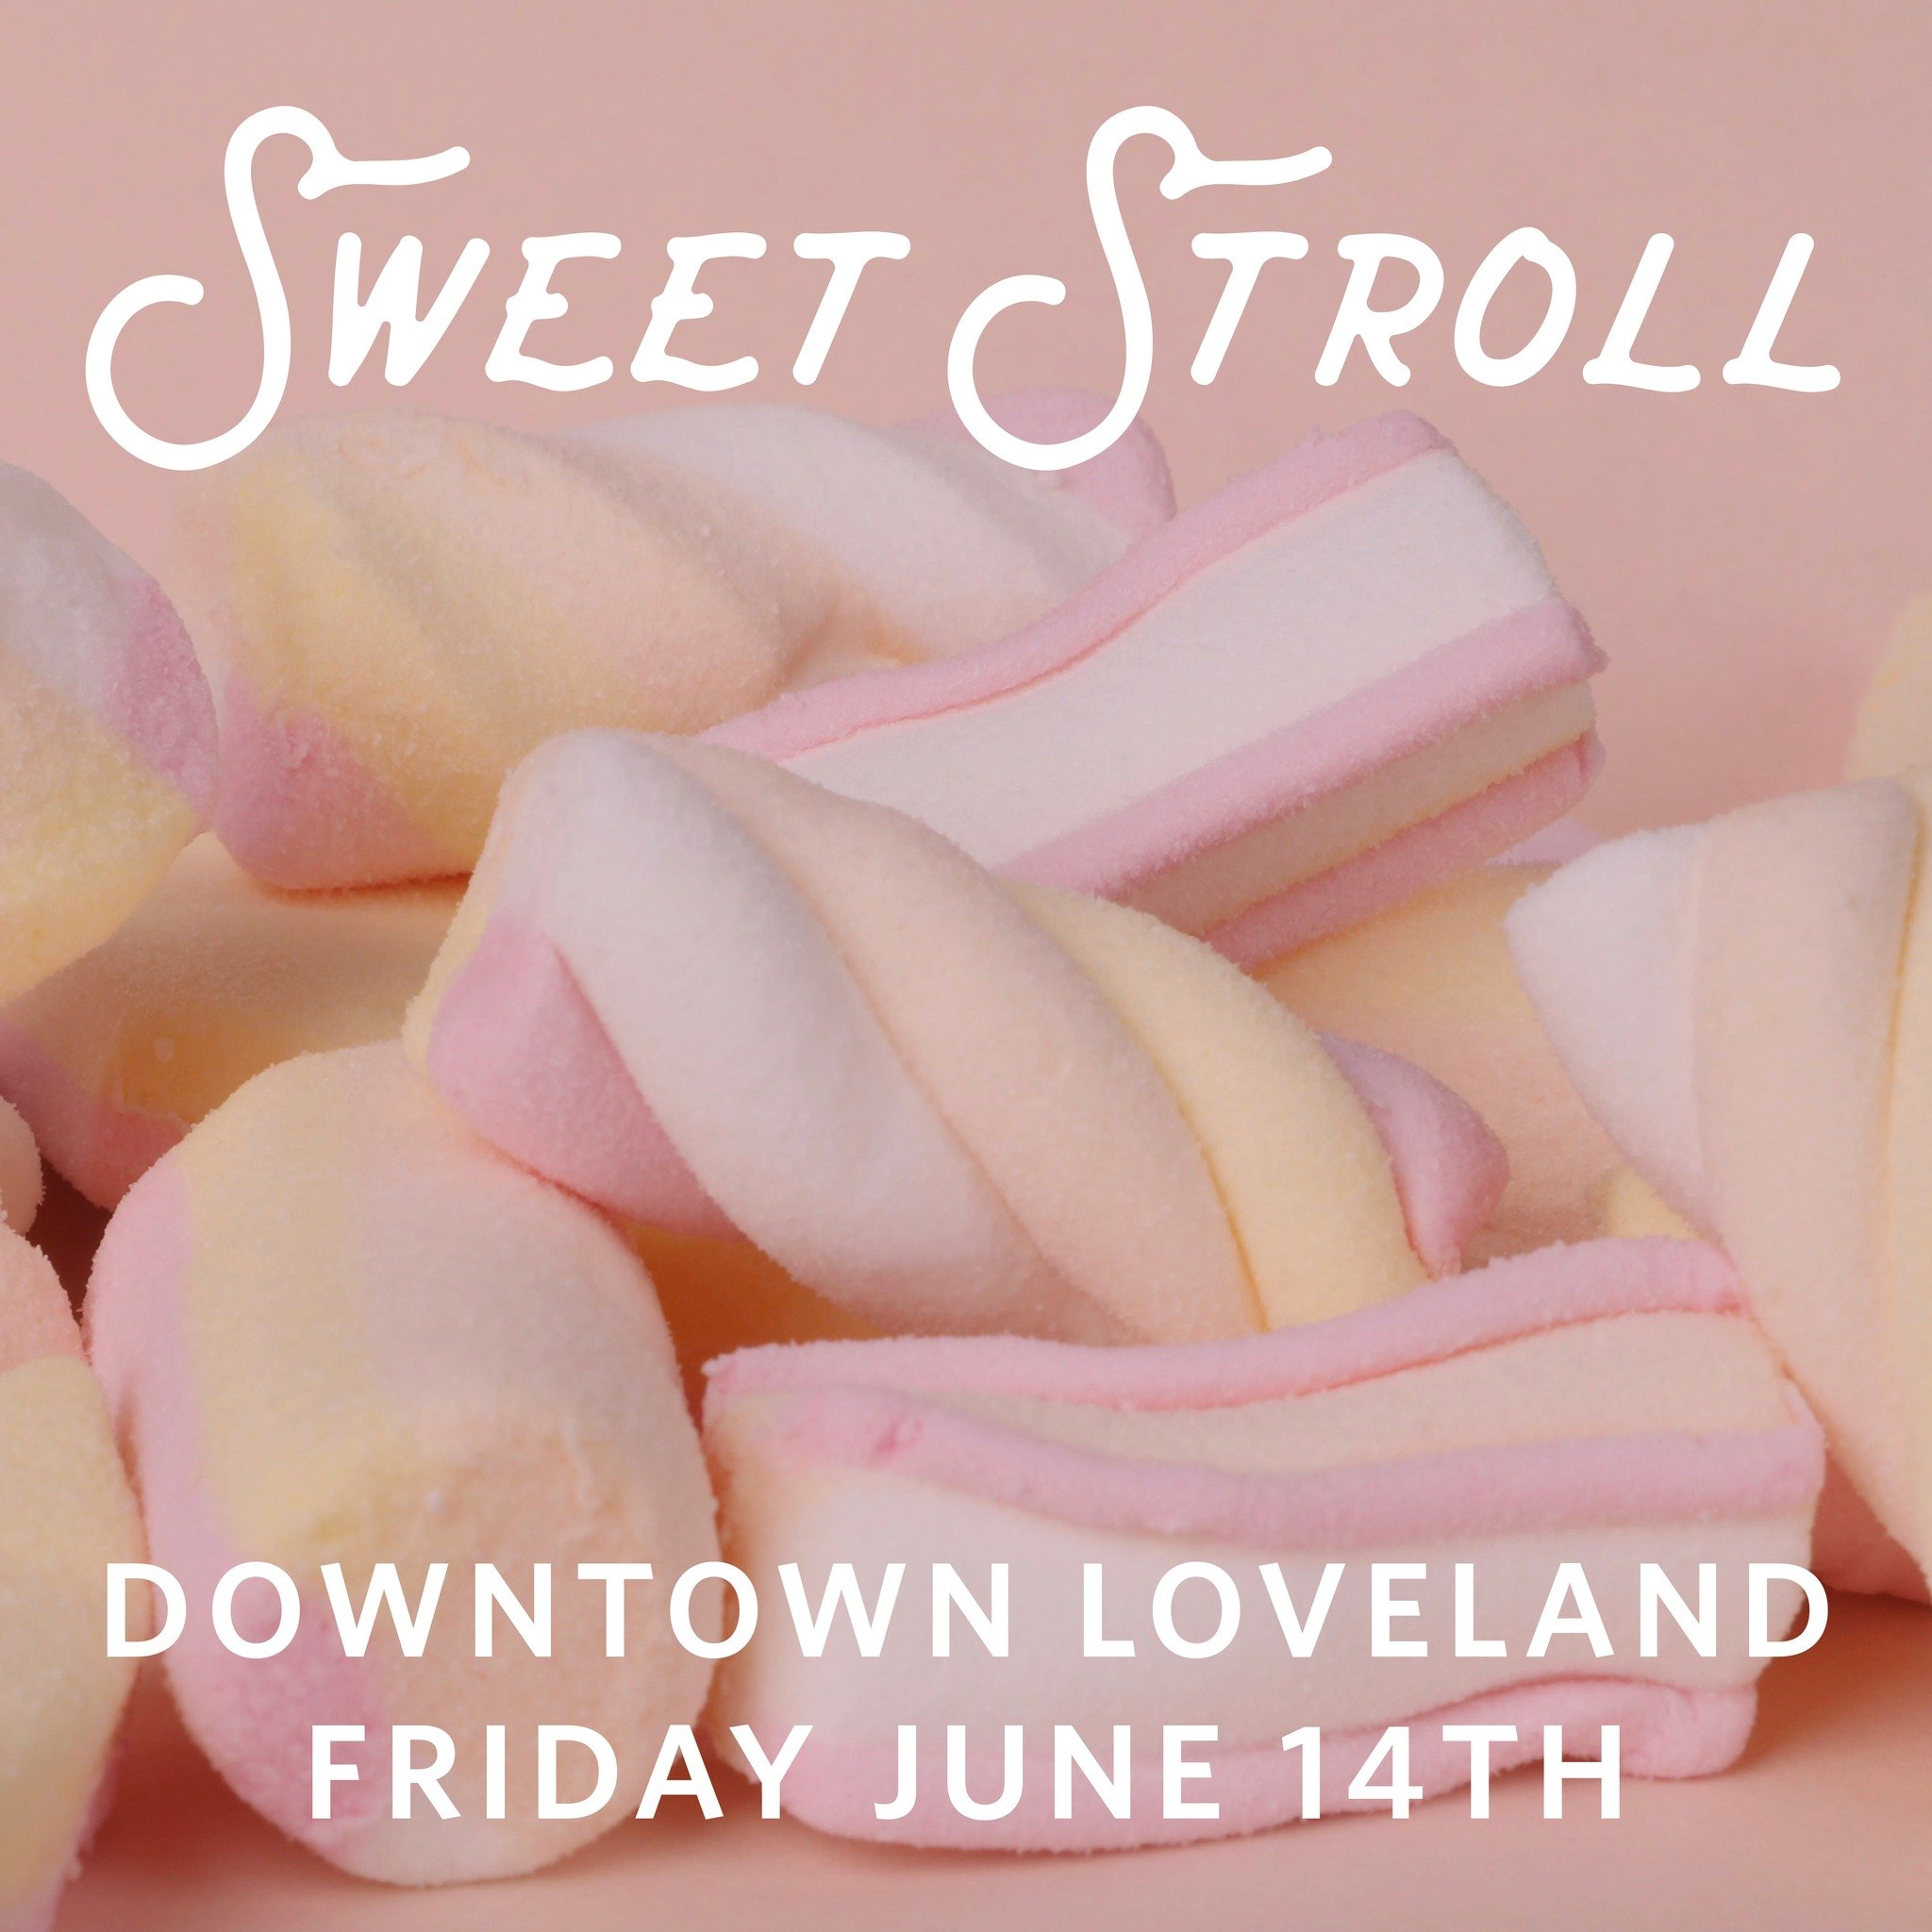 We are hosting a Sweet Stroll through EIGHT Downtown Loveland businesses on June 14th!
How does it work?
Pre-purchase your ticket in advance. Then everyone will check in at a tent in the Foundry Plaza at 7:00 pm to receive your tour card, a bottle of